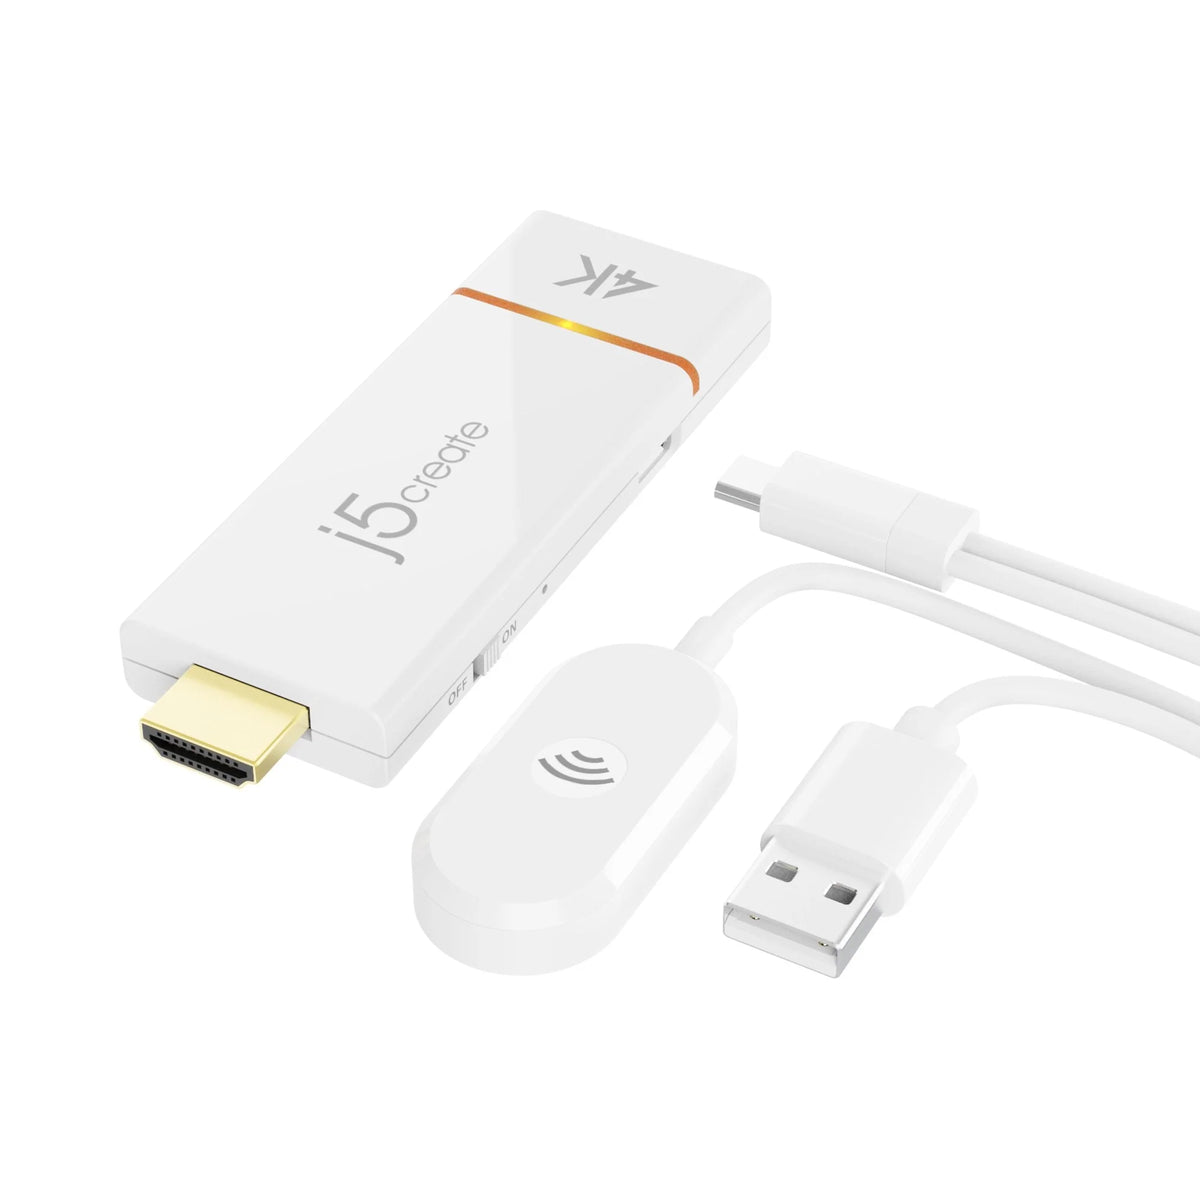 J5create JVAW76 ScreenCast 4K Wireless Display Adapter - Cast Laptop to TV (Supports Miracast, AirPlay, Chromecast, Windows, macOS, iOS, Android) J5CREATE